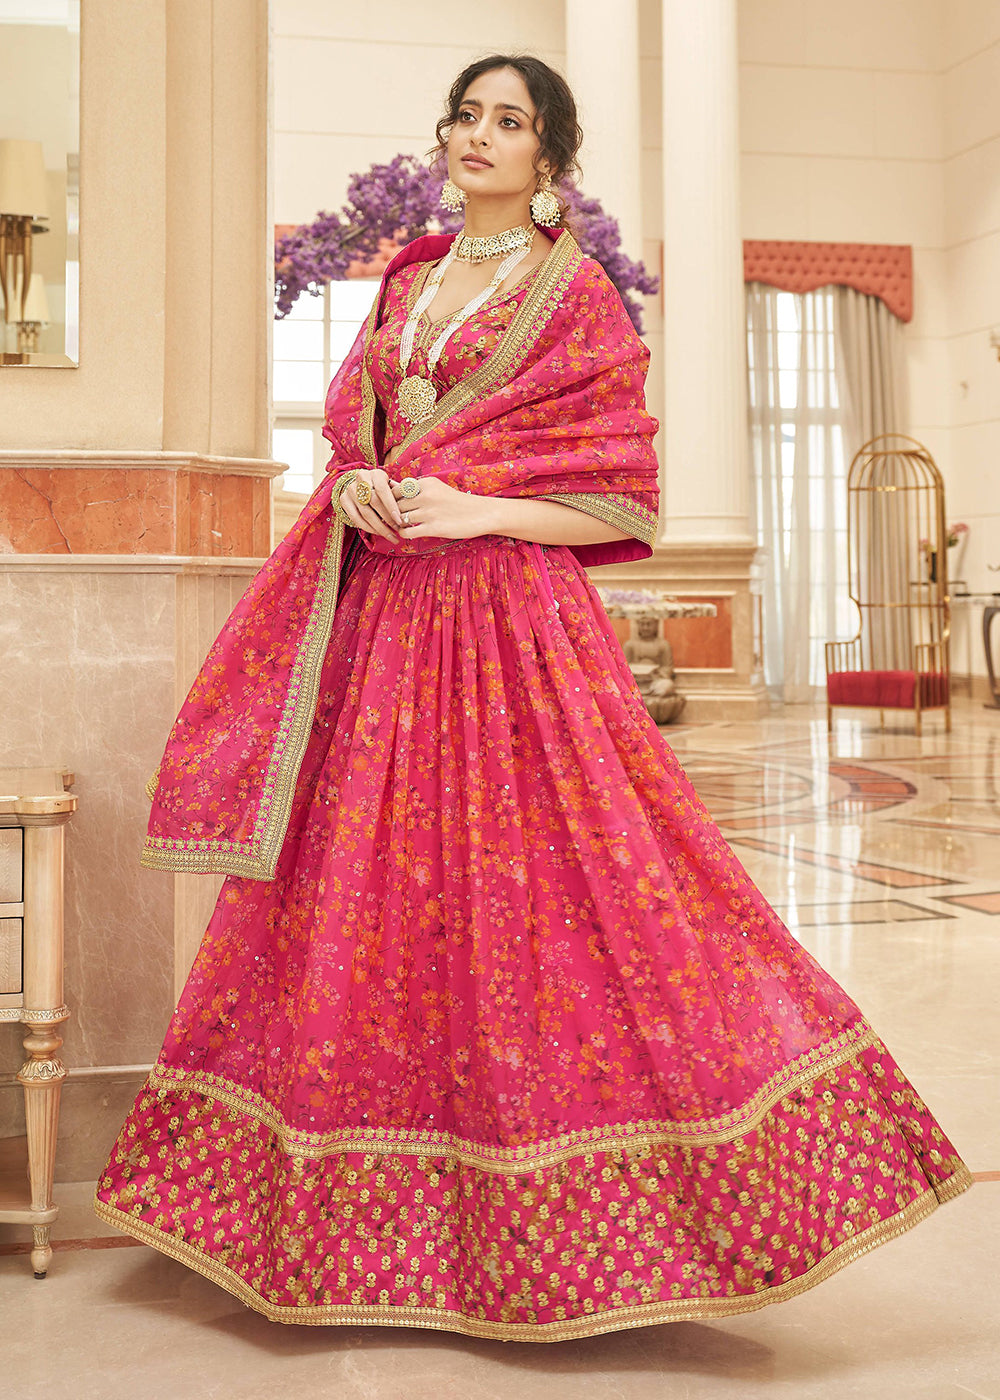 Buy Now Appealing Pink Organza Heavy Embroidery Wedding Lehenga Choli Online in USA, UK, Canada & Worldwide at Empress Clothing.